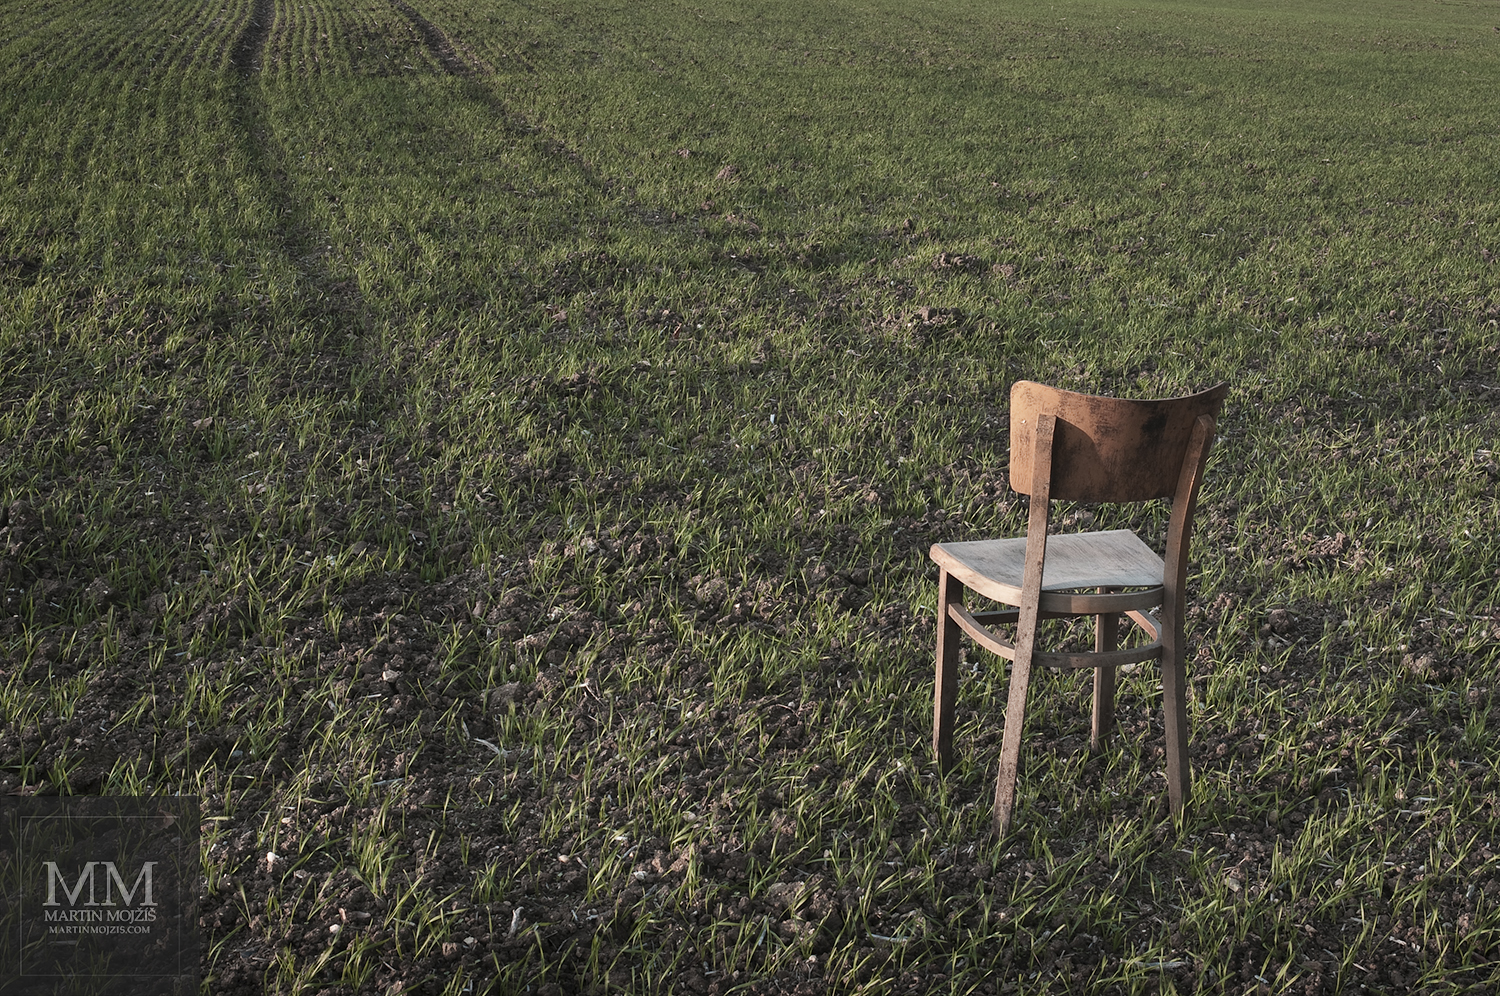 A chair standing in the field. Fine Art photograph of Martin Mojzis with the title CHAIR I.